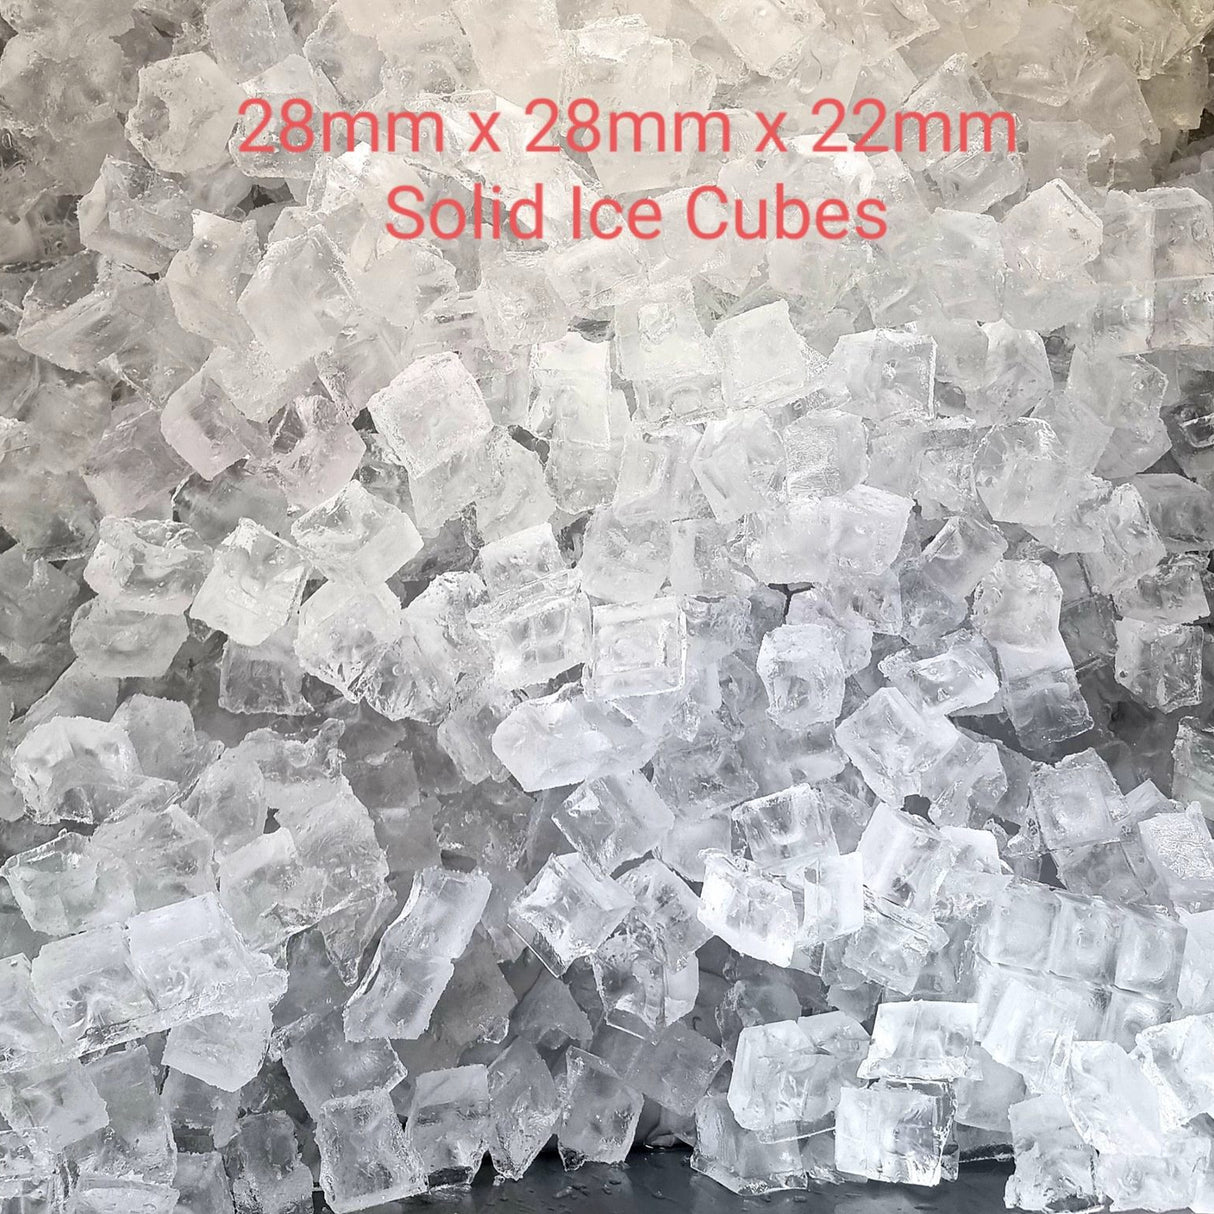 Shot of the ice cubes the ICEPRO 680kg/24hr Commercial Cube Ice Maker Machine can produce.